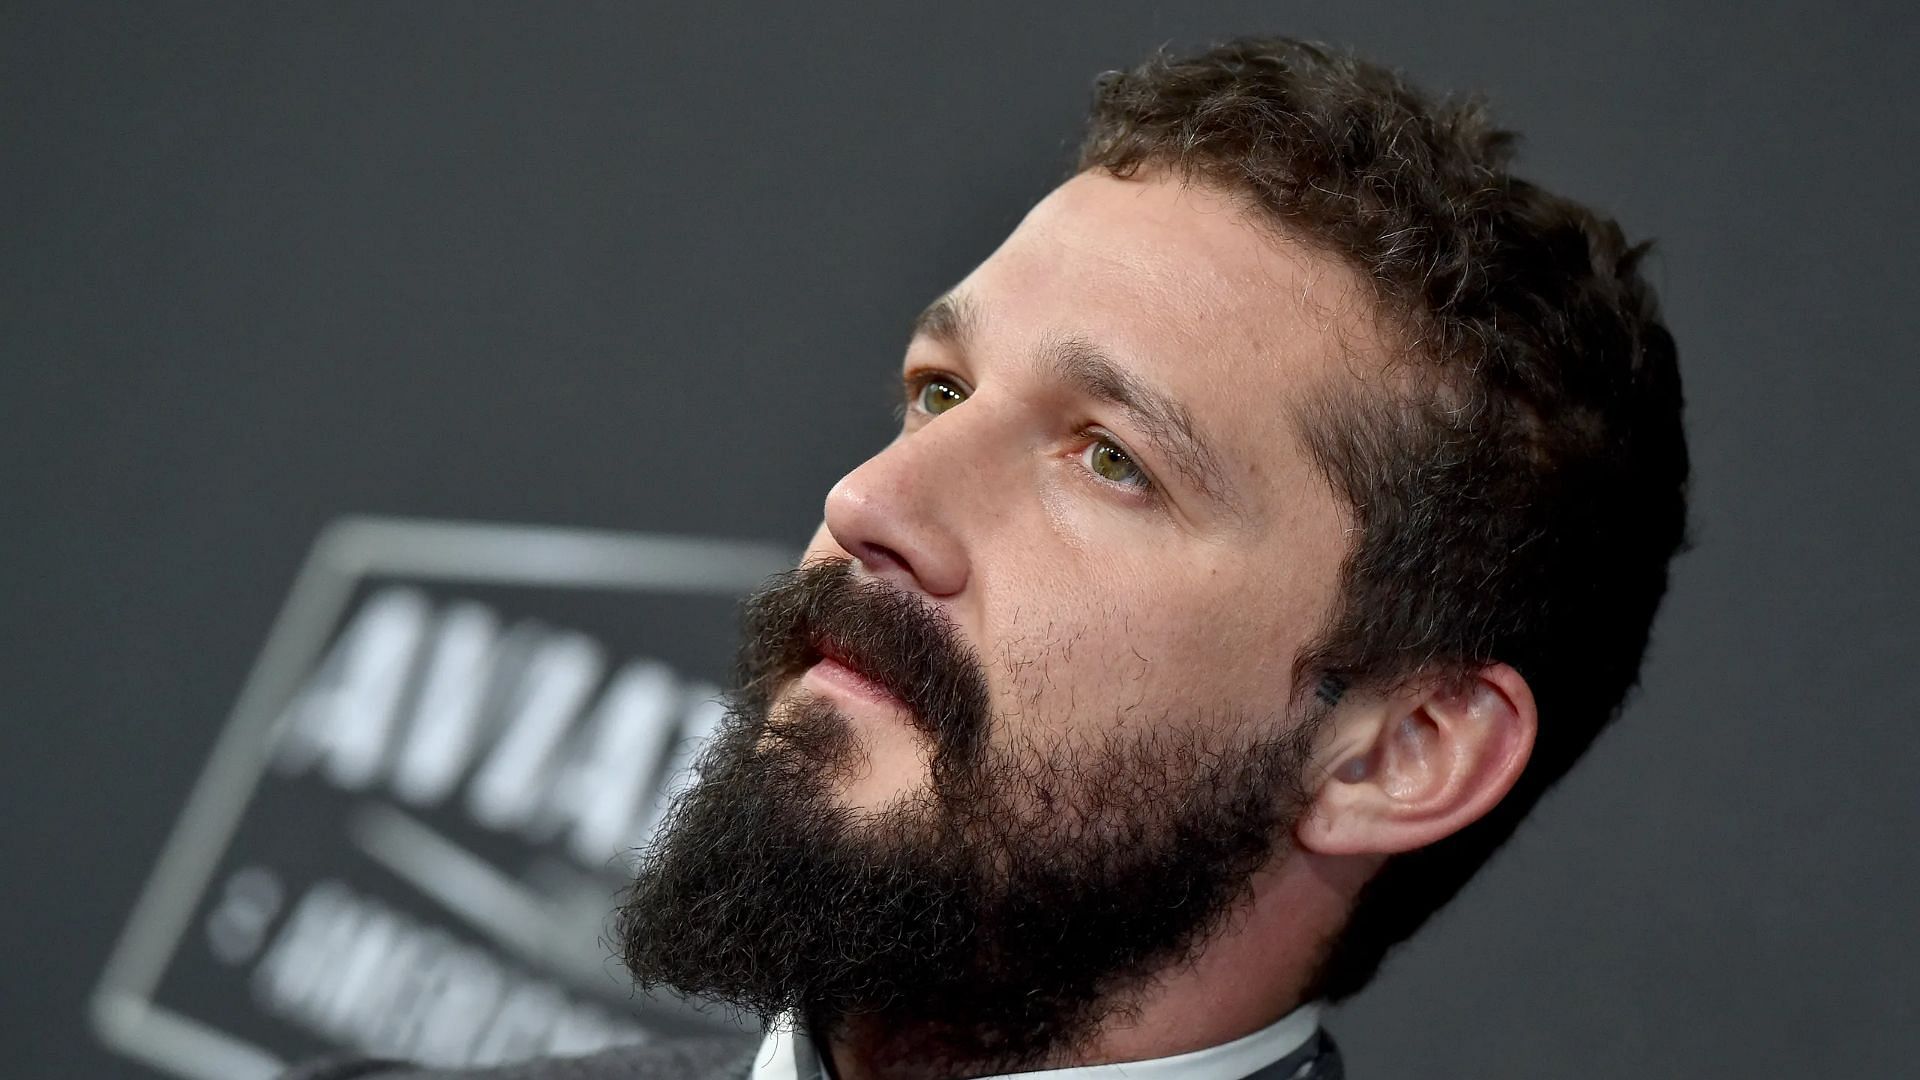 Shia LaBeouf. (Image via Axelle/Bauer-Griffin/Getty Images)